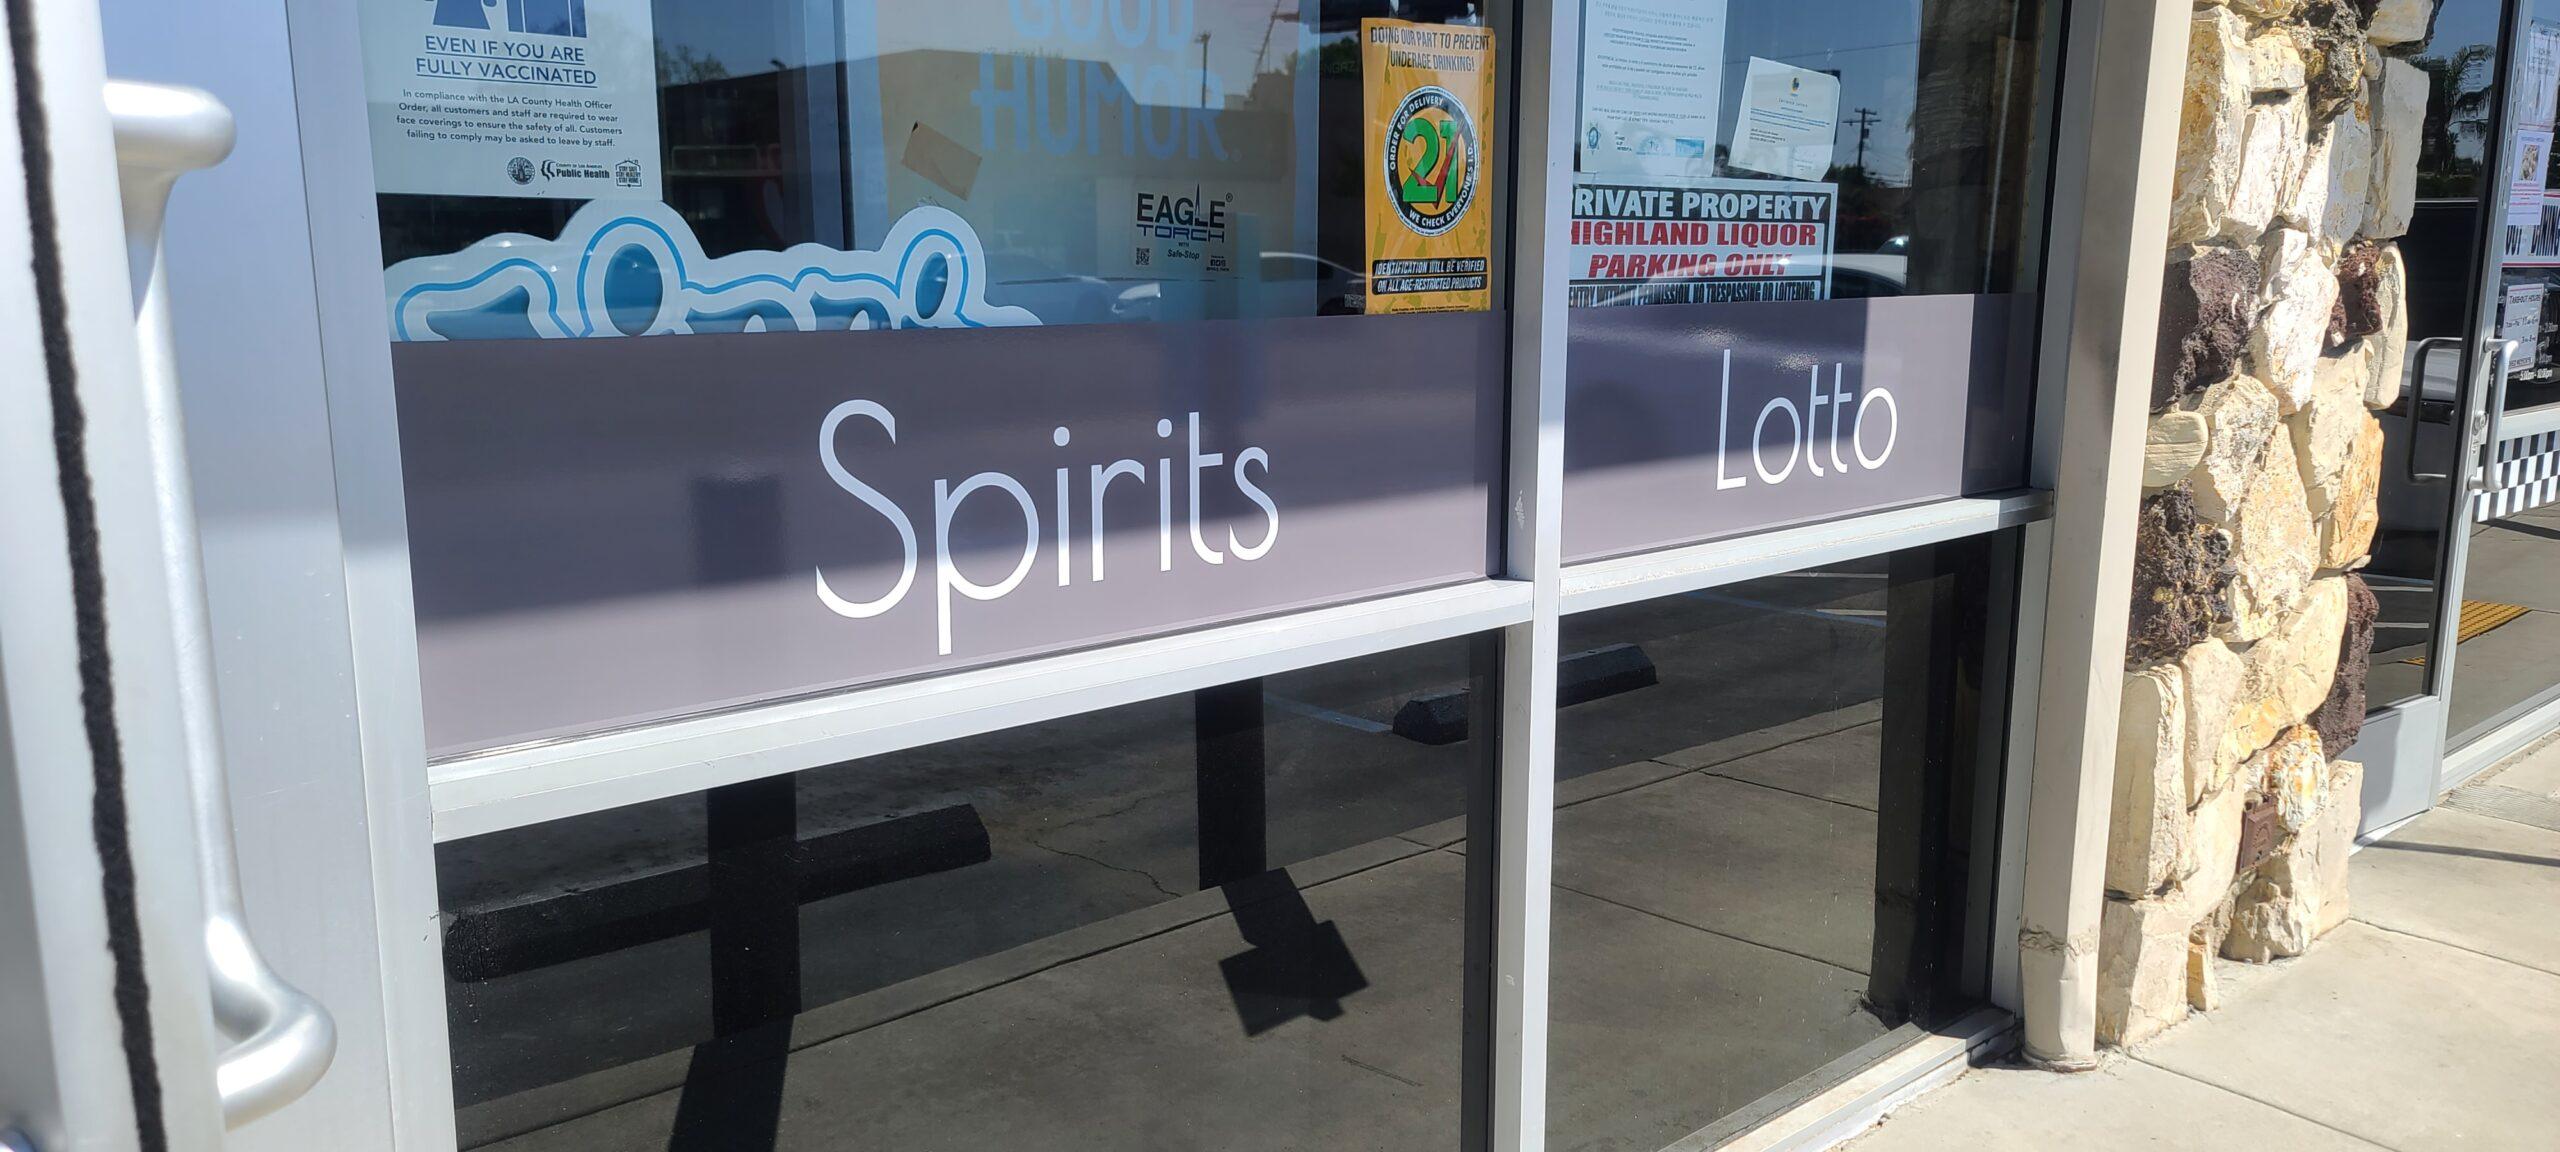 You are currently viewing Storefront Window Graphics for Highland Liquor in Granada Hills